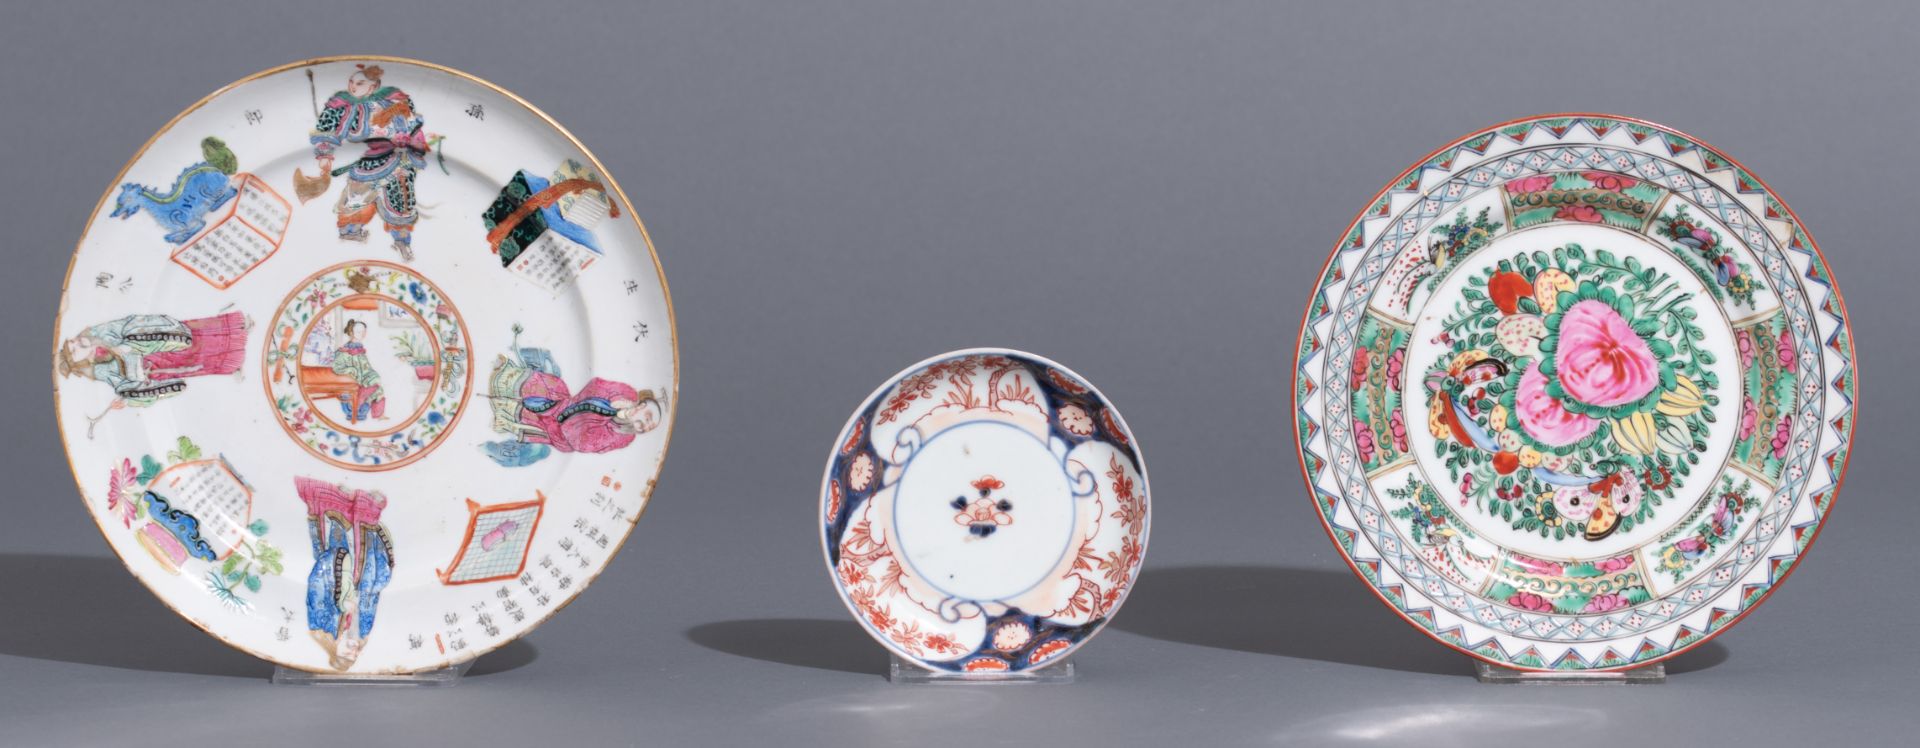 A collection of Chinese and Japanese porcelain items, 18th / 19th / 20thC, H 4 - 47 - ø 10,5 - 23 cm - Image 12 of 19